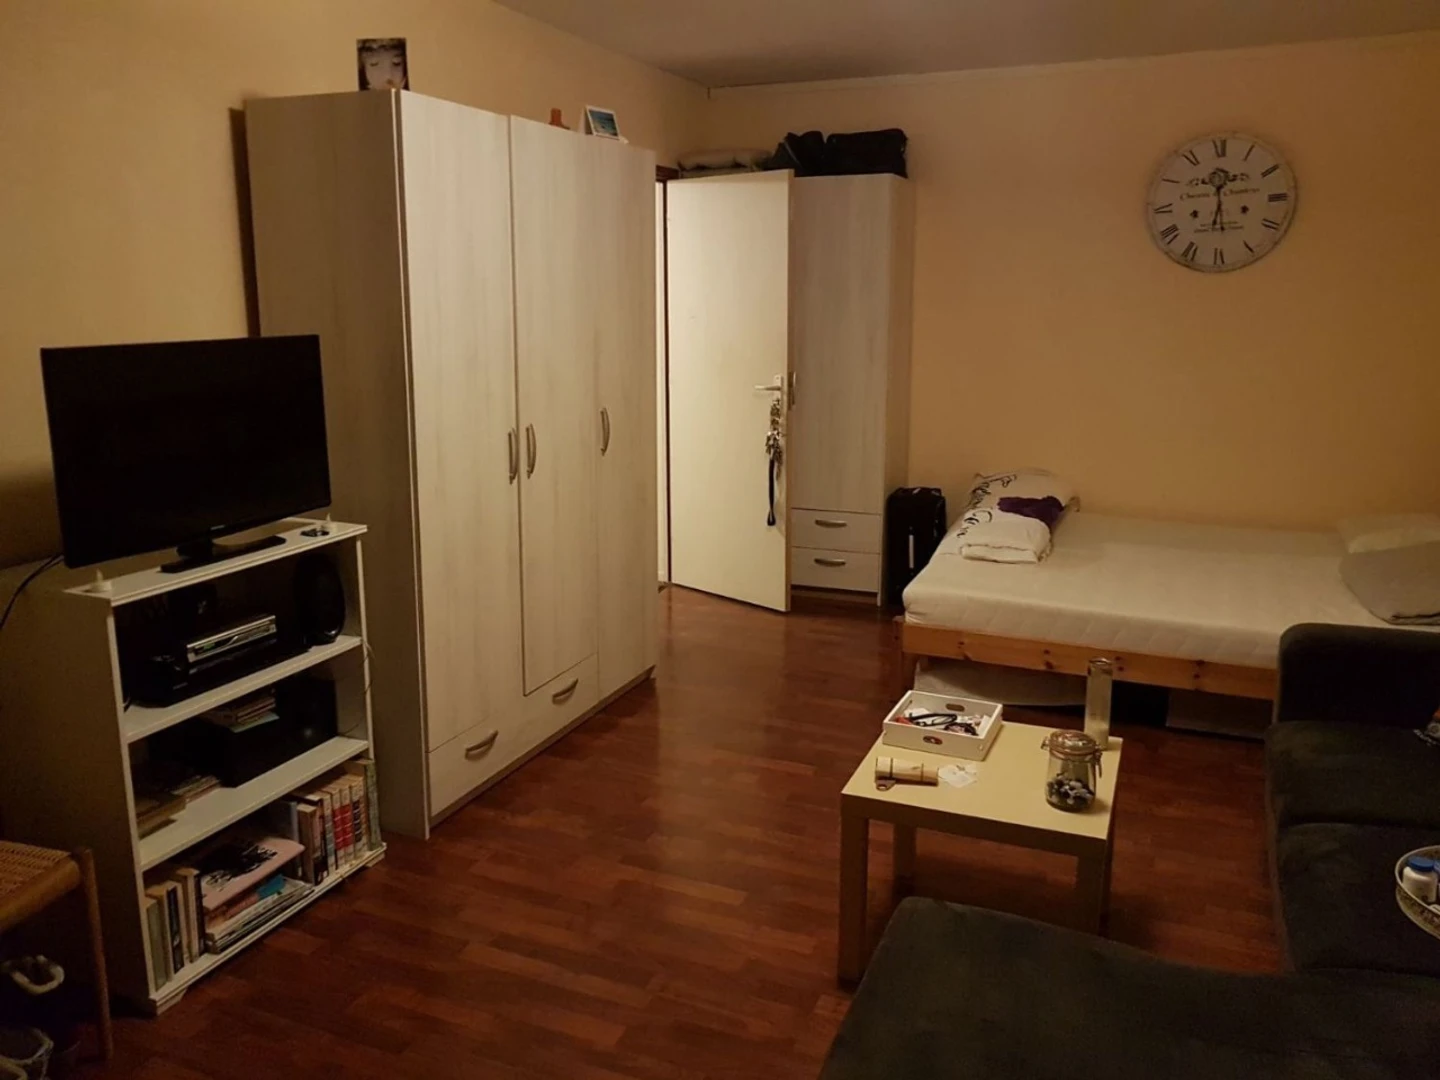 Renting rooms by the month in amsterdam